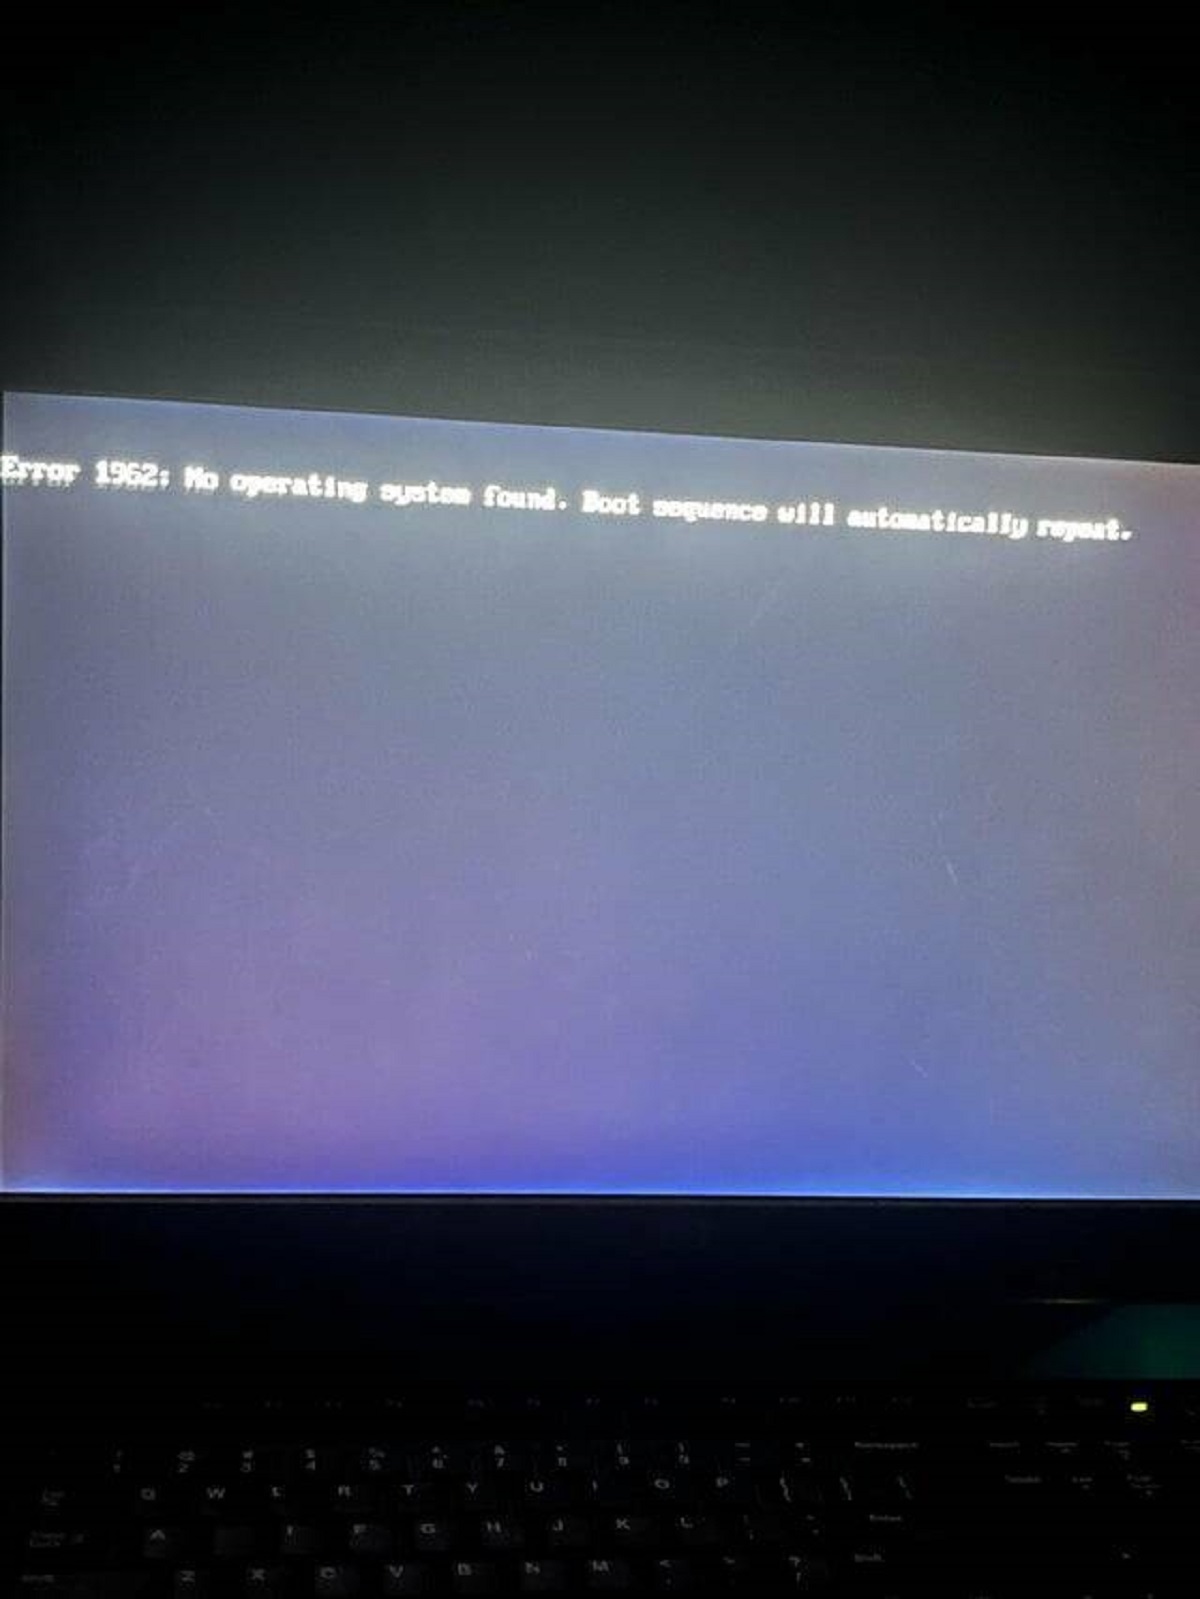 "My computer just stopped working :("